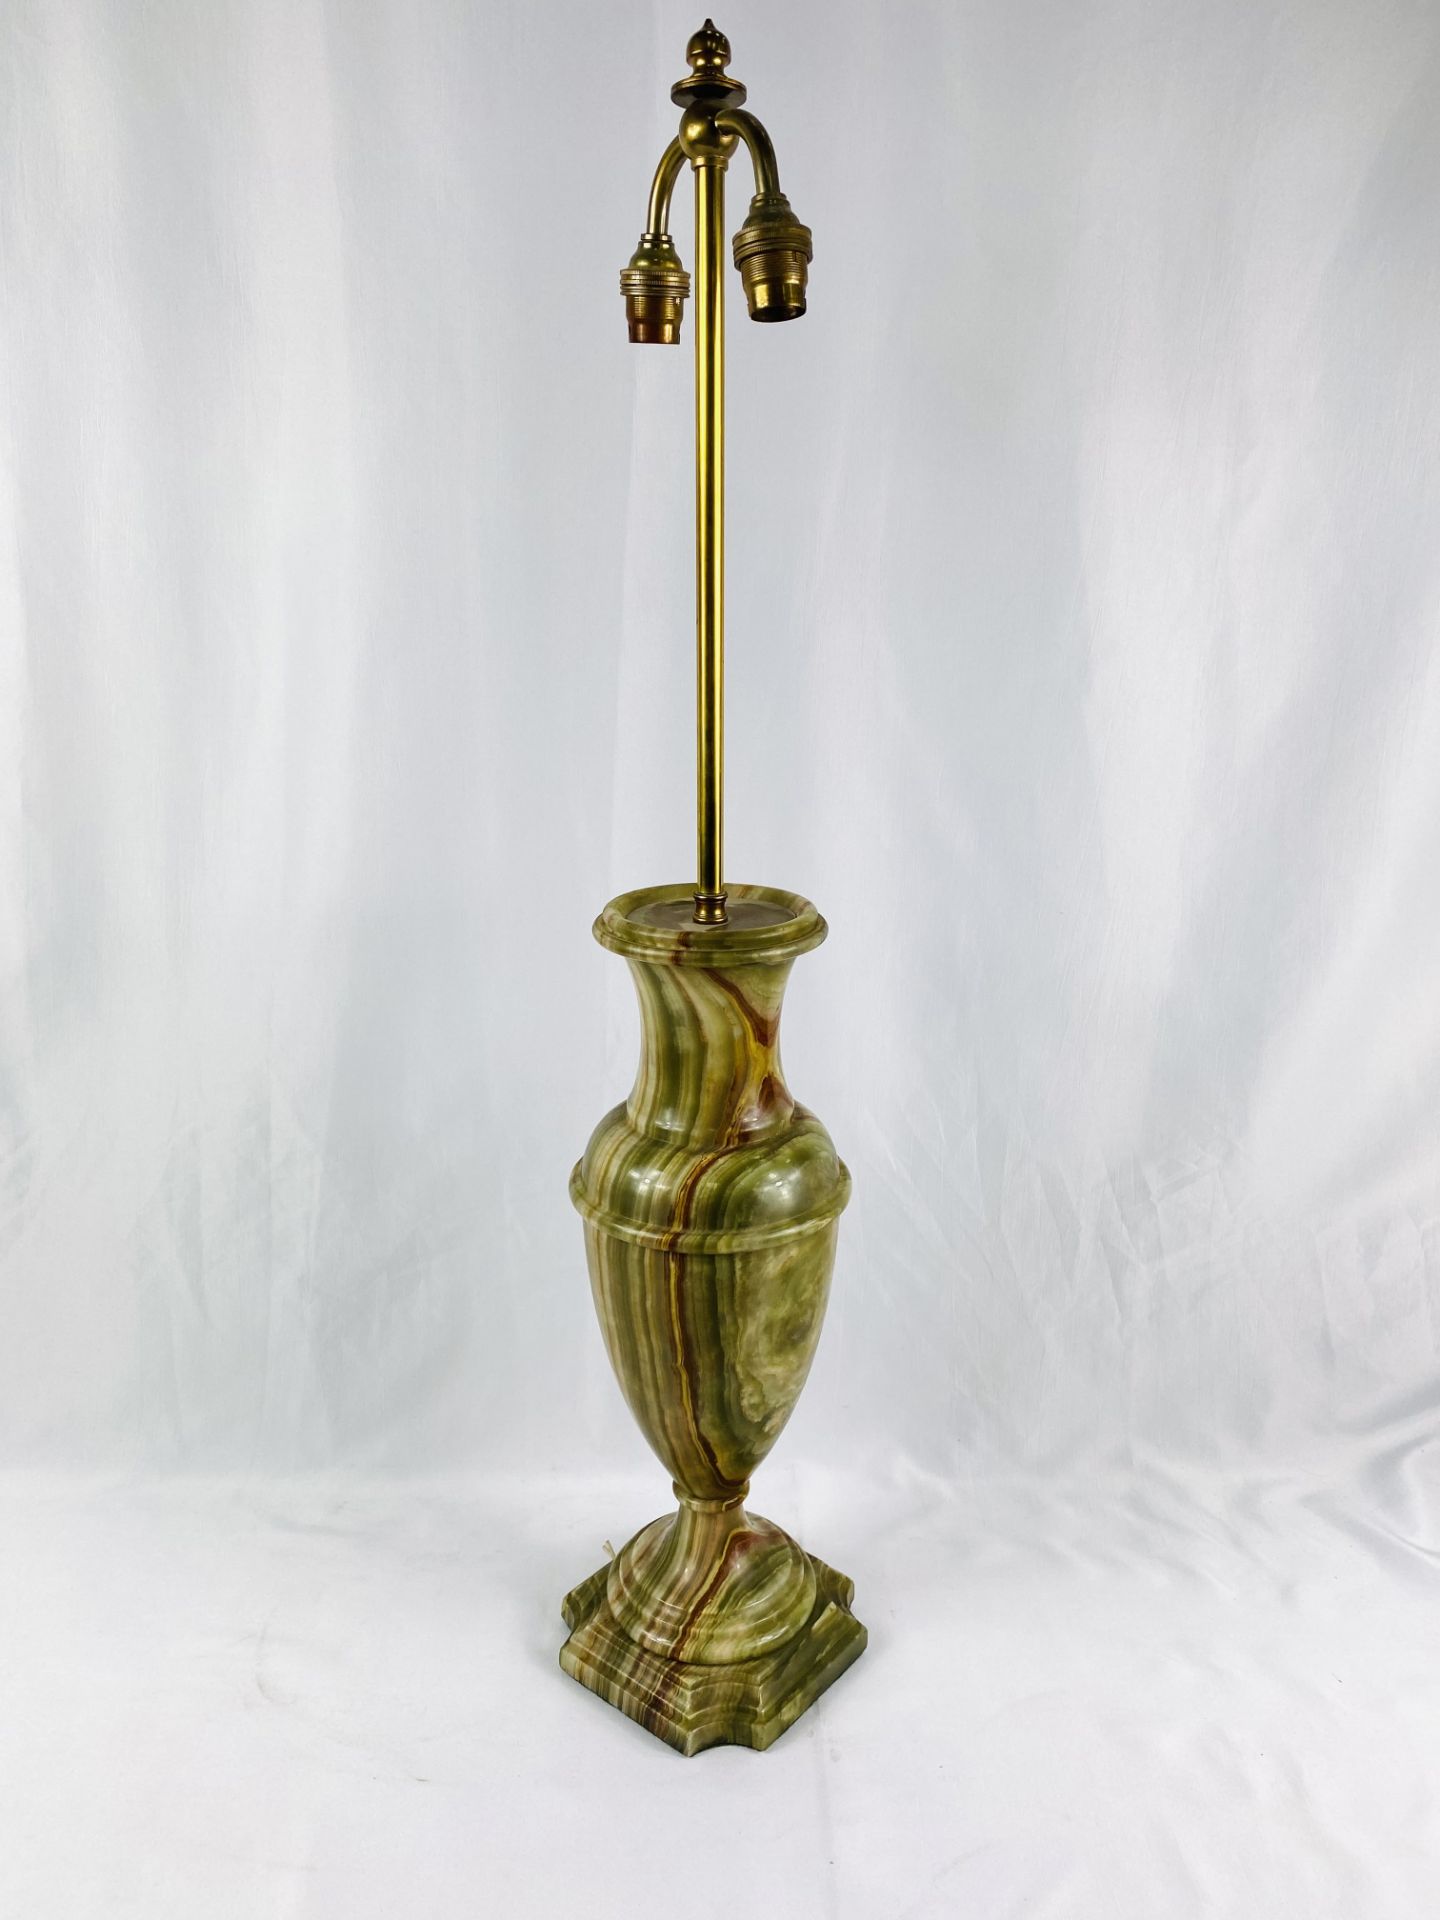 Green Onyx table lamp - Image 4 of 4